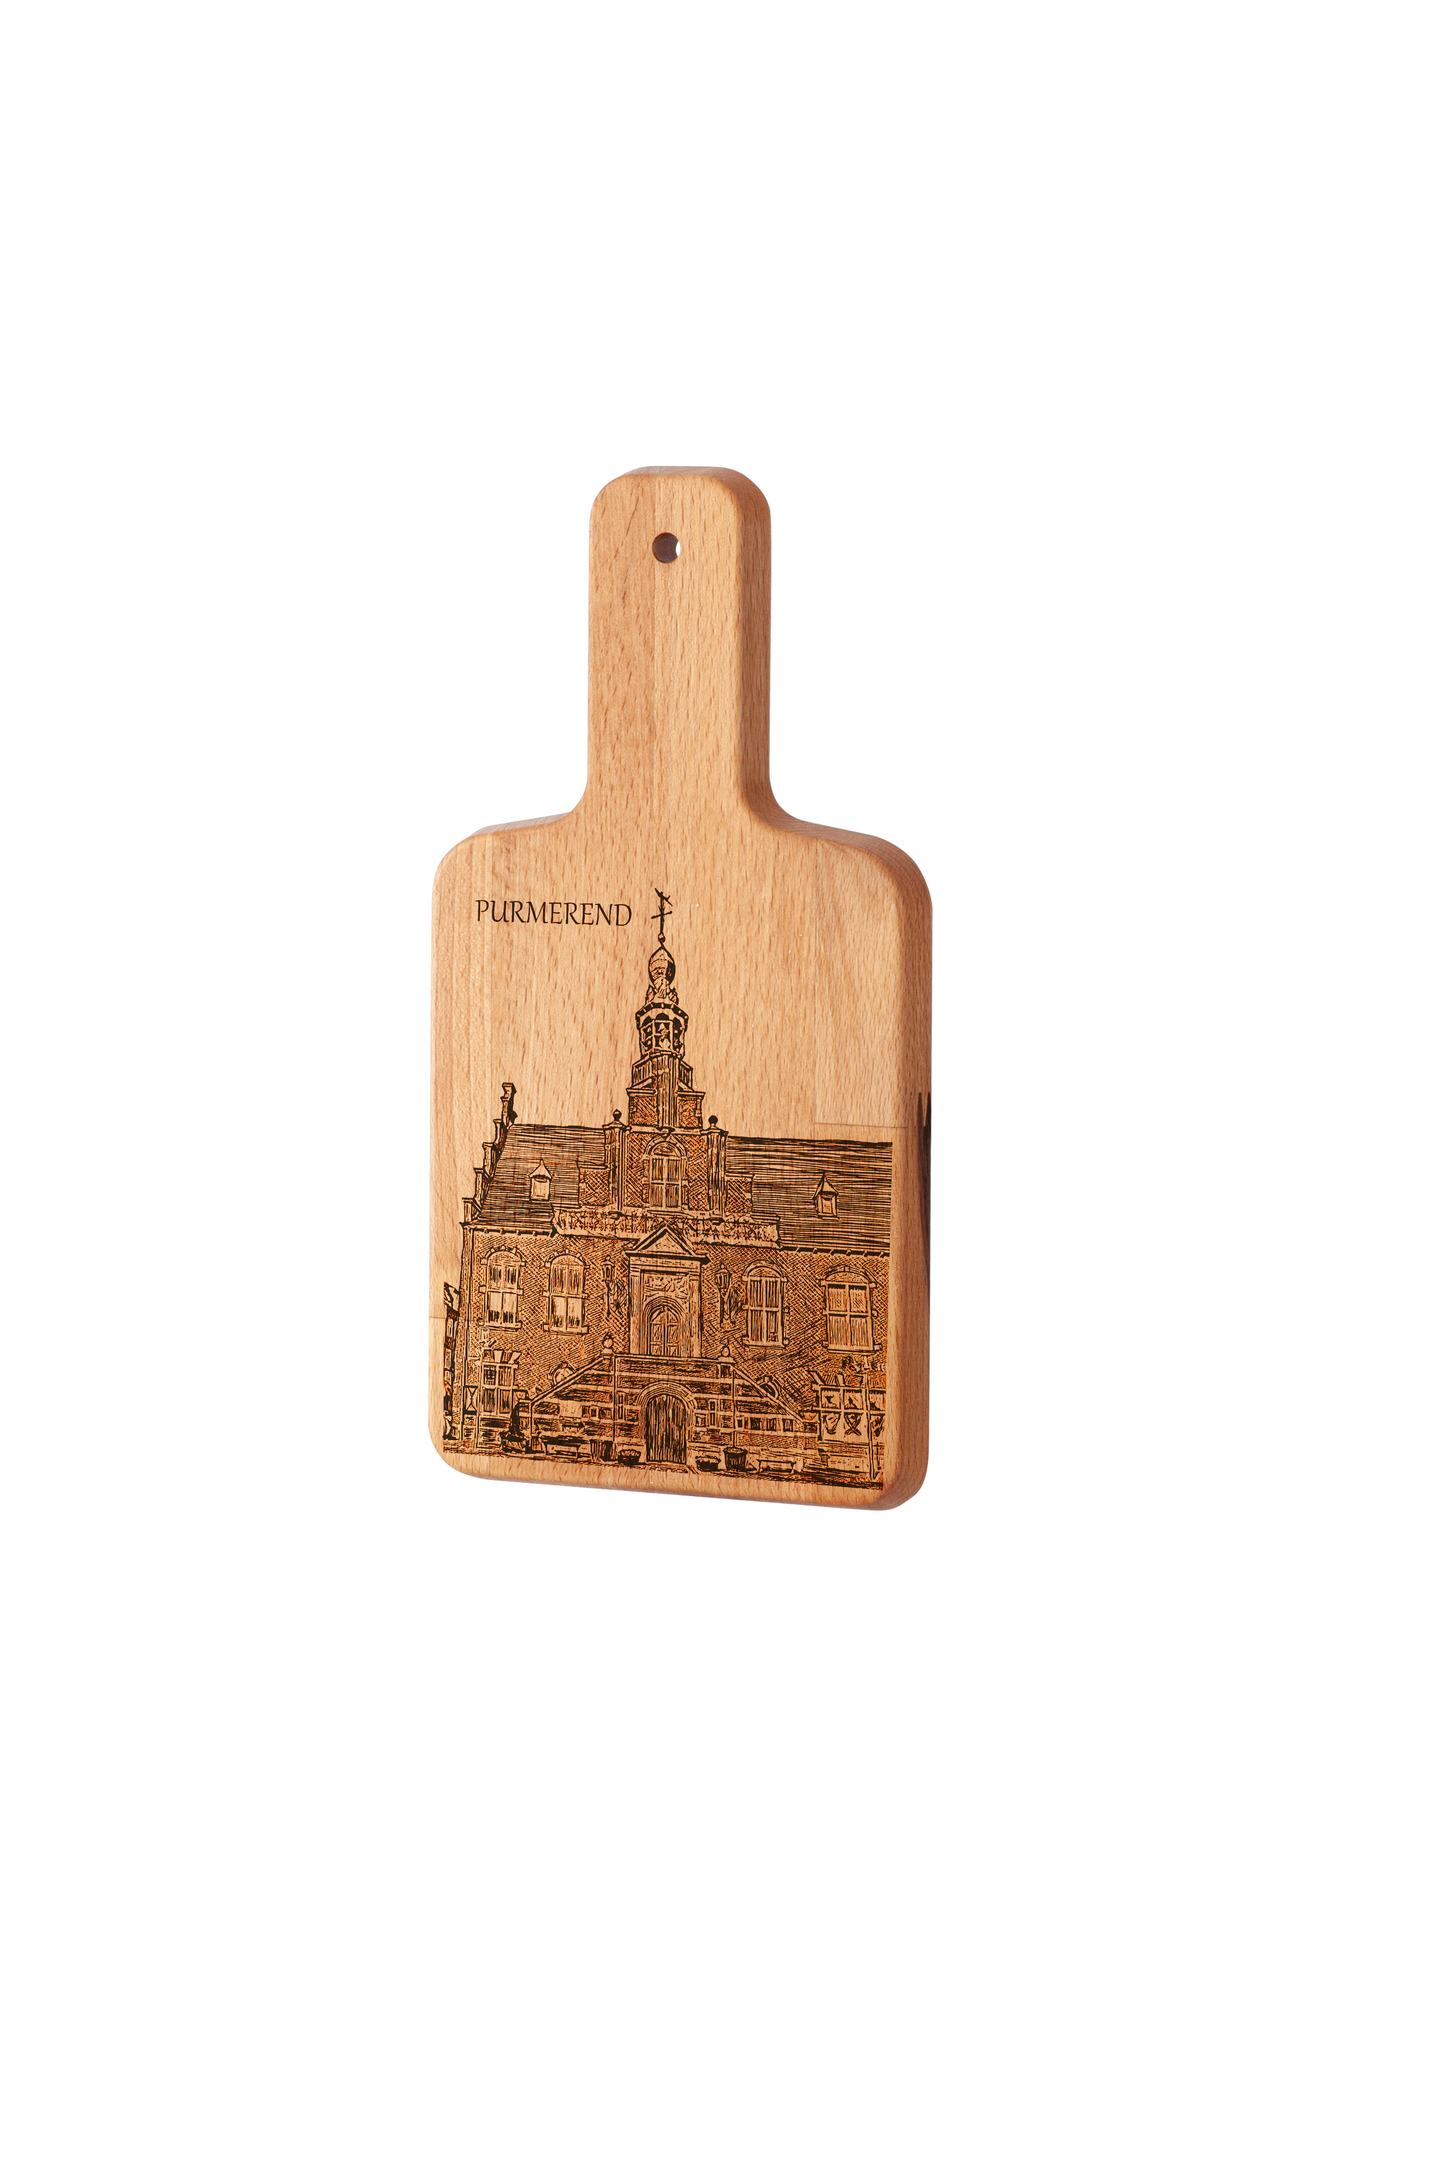 Purmerend, Stadhuis, cheese board, side view